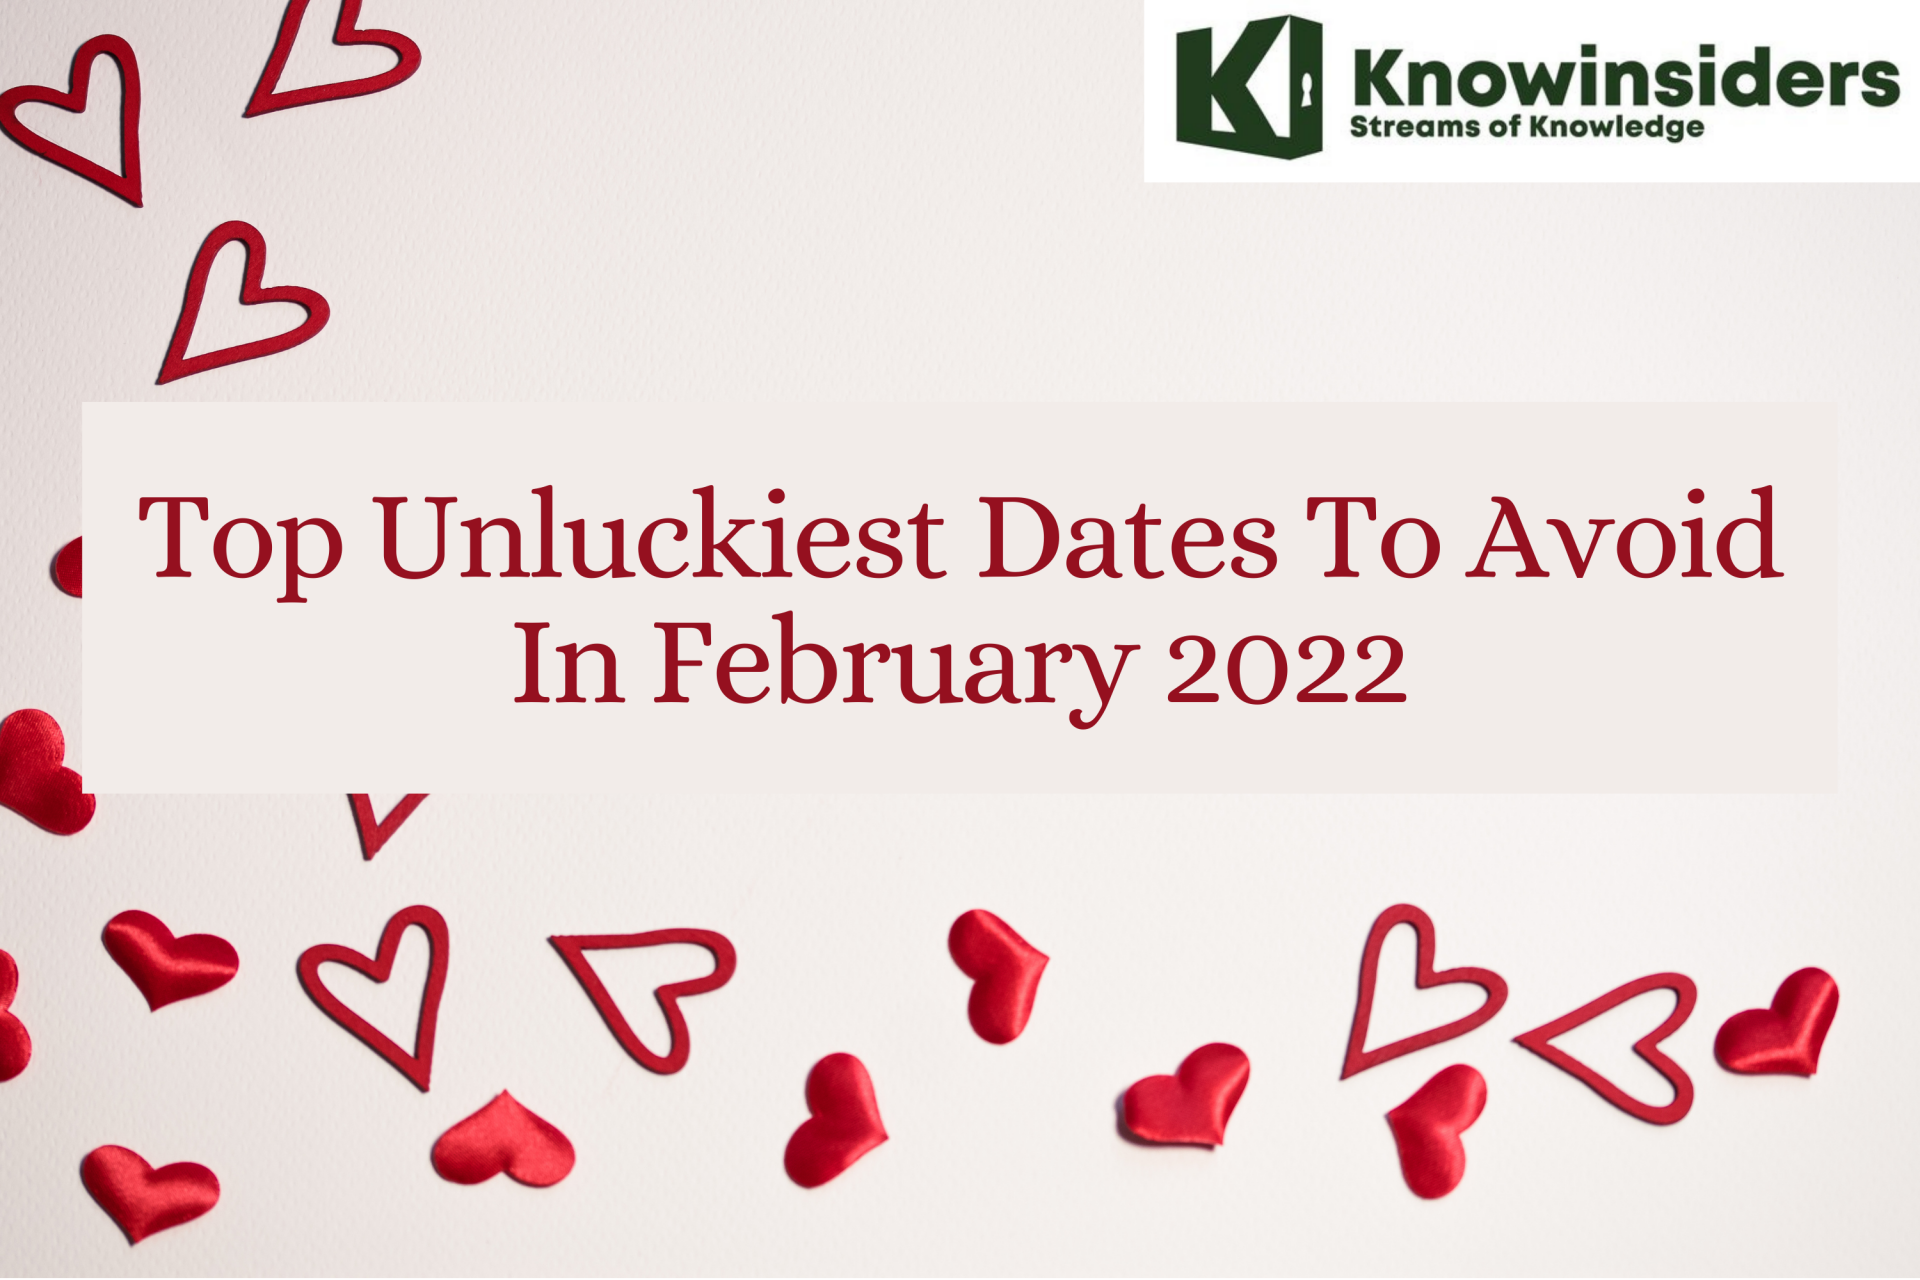 Top Unluckiest Dates To Avoid In February 2022